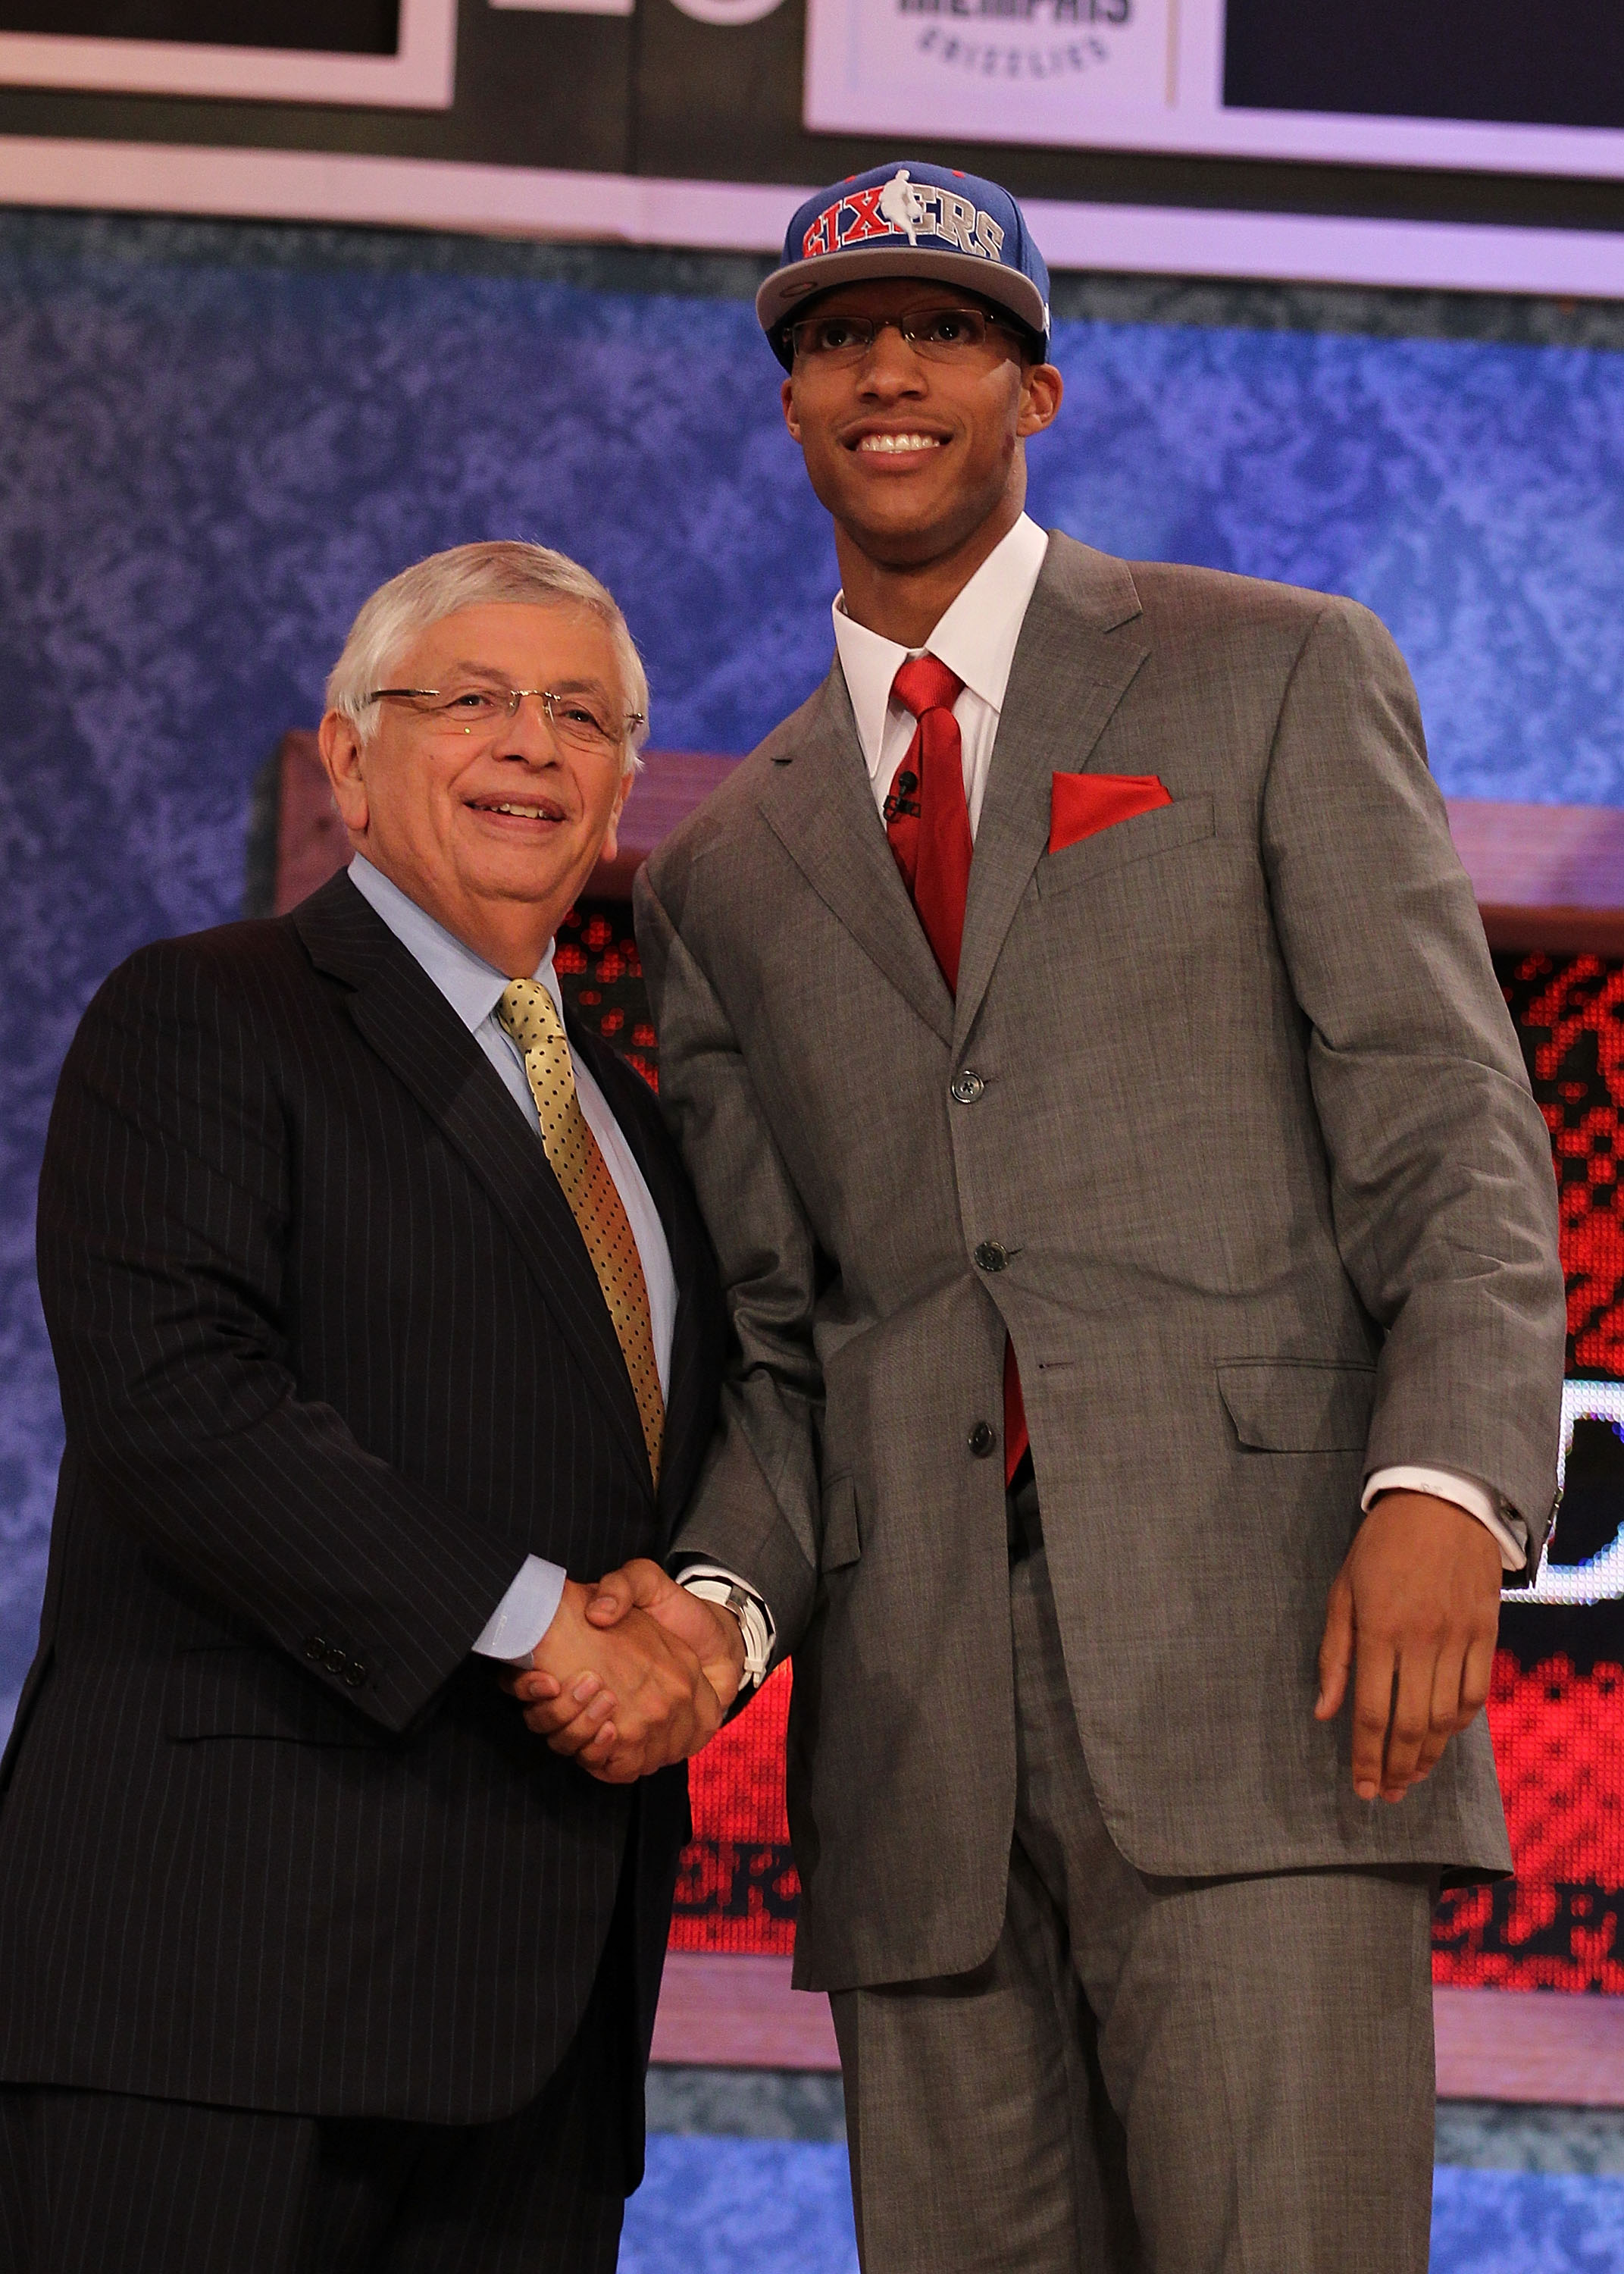 NEW YORK - JUNE 24:  Evan Turner of Ohio State stands with NBA Commisioner David Stern after being drafted by the Philadelphia 76ers second overall at Madison Square Garden on June 24, 2010 in New York City.  NOTE TO USER: User expressly acknowledges and